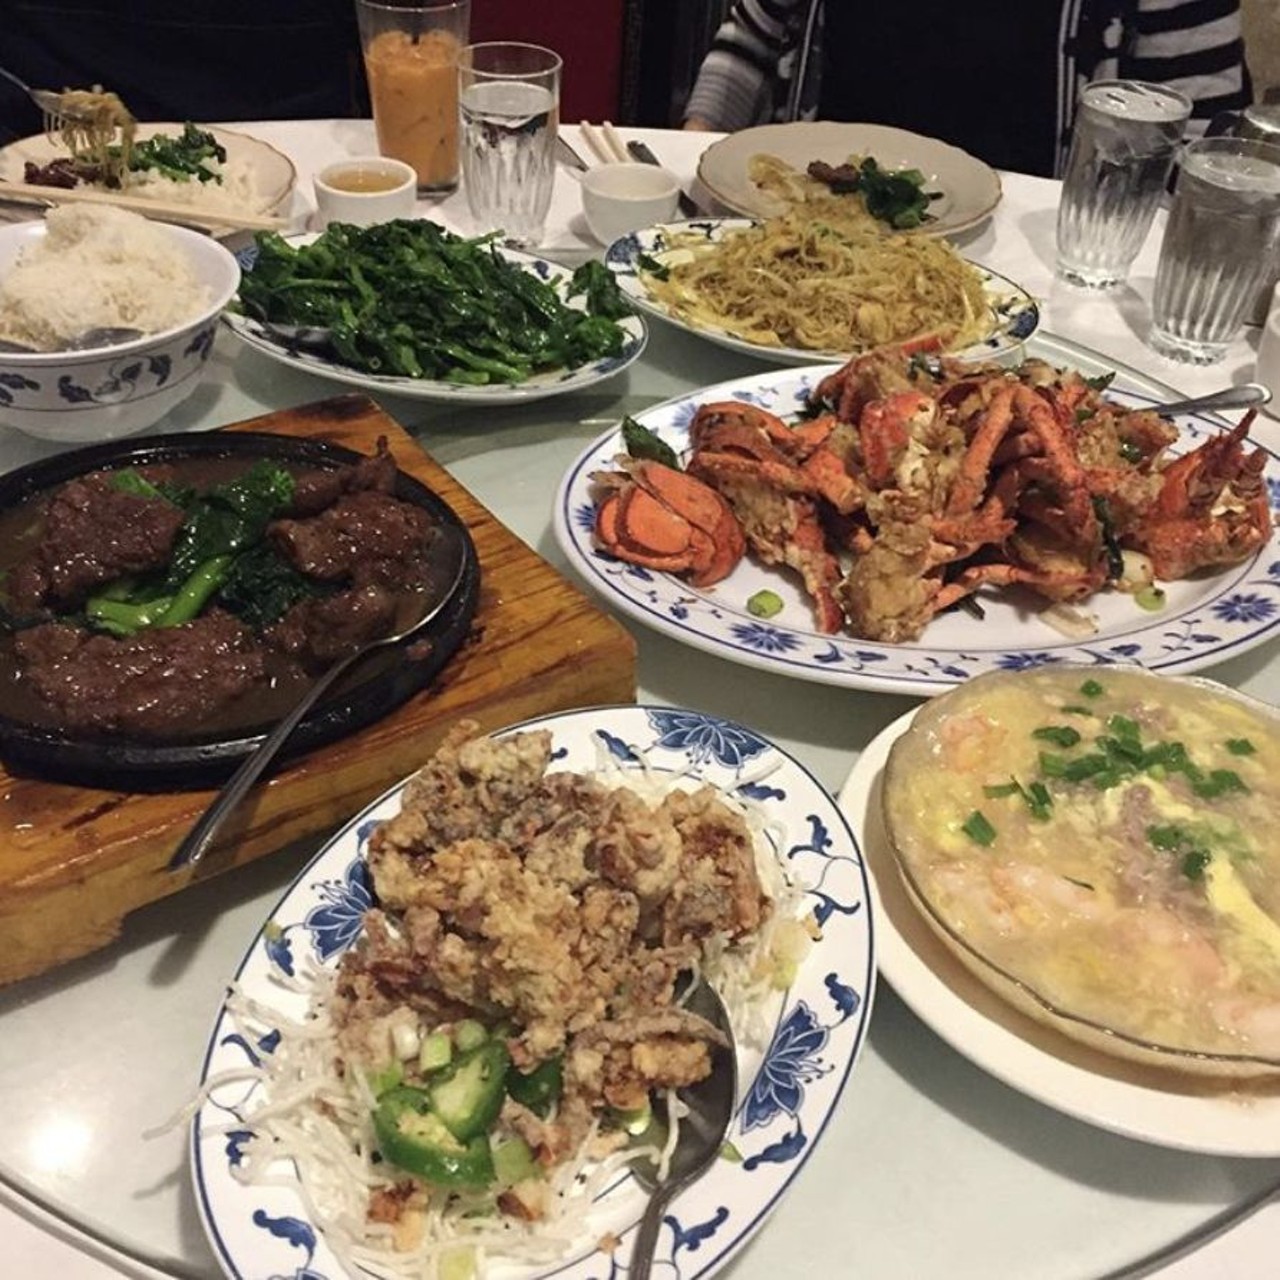  Siam Cafe
3951 St Clair Ave. NE, Cleveland
Fish dishes are supposed to bring in prosperity during the New Year, so it&#146;s the perfect time to try one of Siam Cafe&#146;s several signature seafood dishes.
Photo via  tksnow14/Instagram